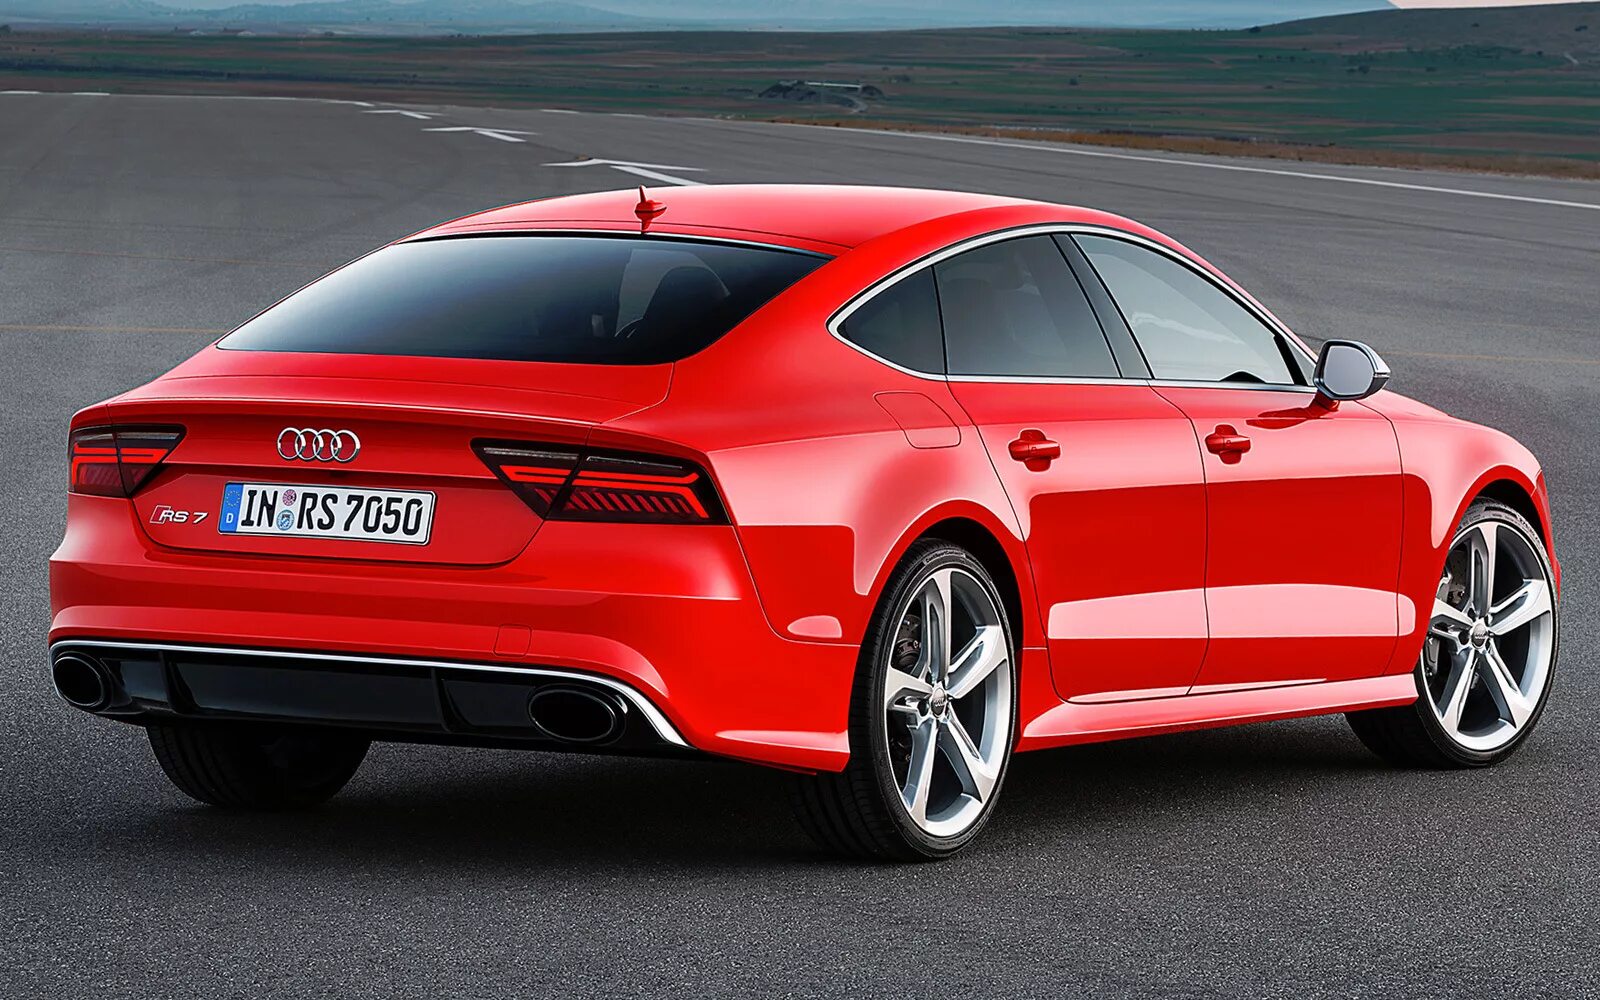 А 7 8 в 2 3 11. Audi rs7 Sportback 2021. Audi rs7 Sportback 2022. Audi rs7 Coupe. Ауди rs7 Sportback 2020.